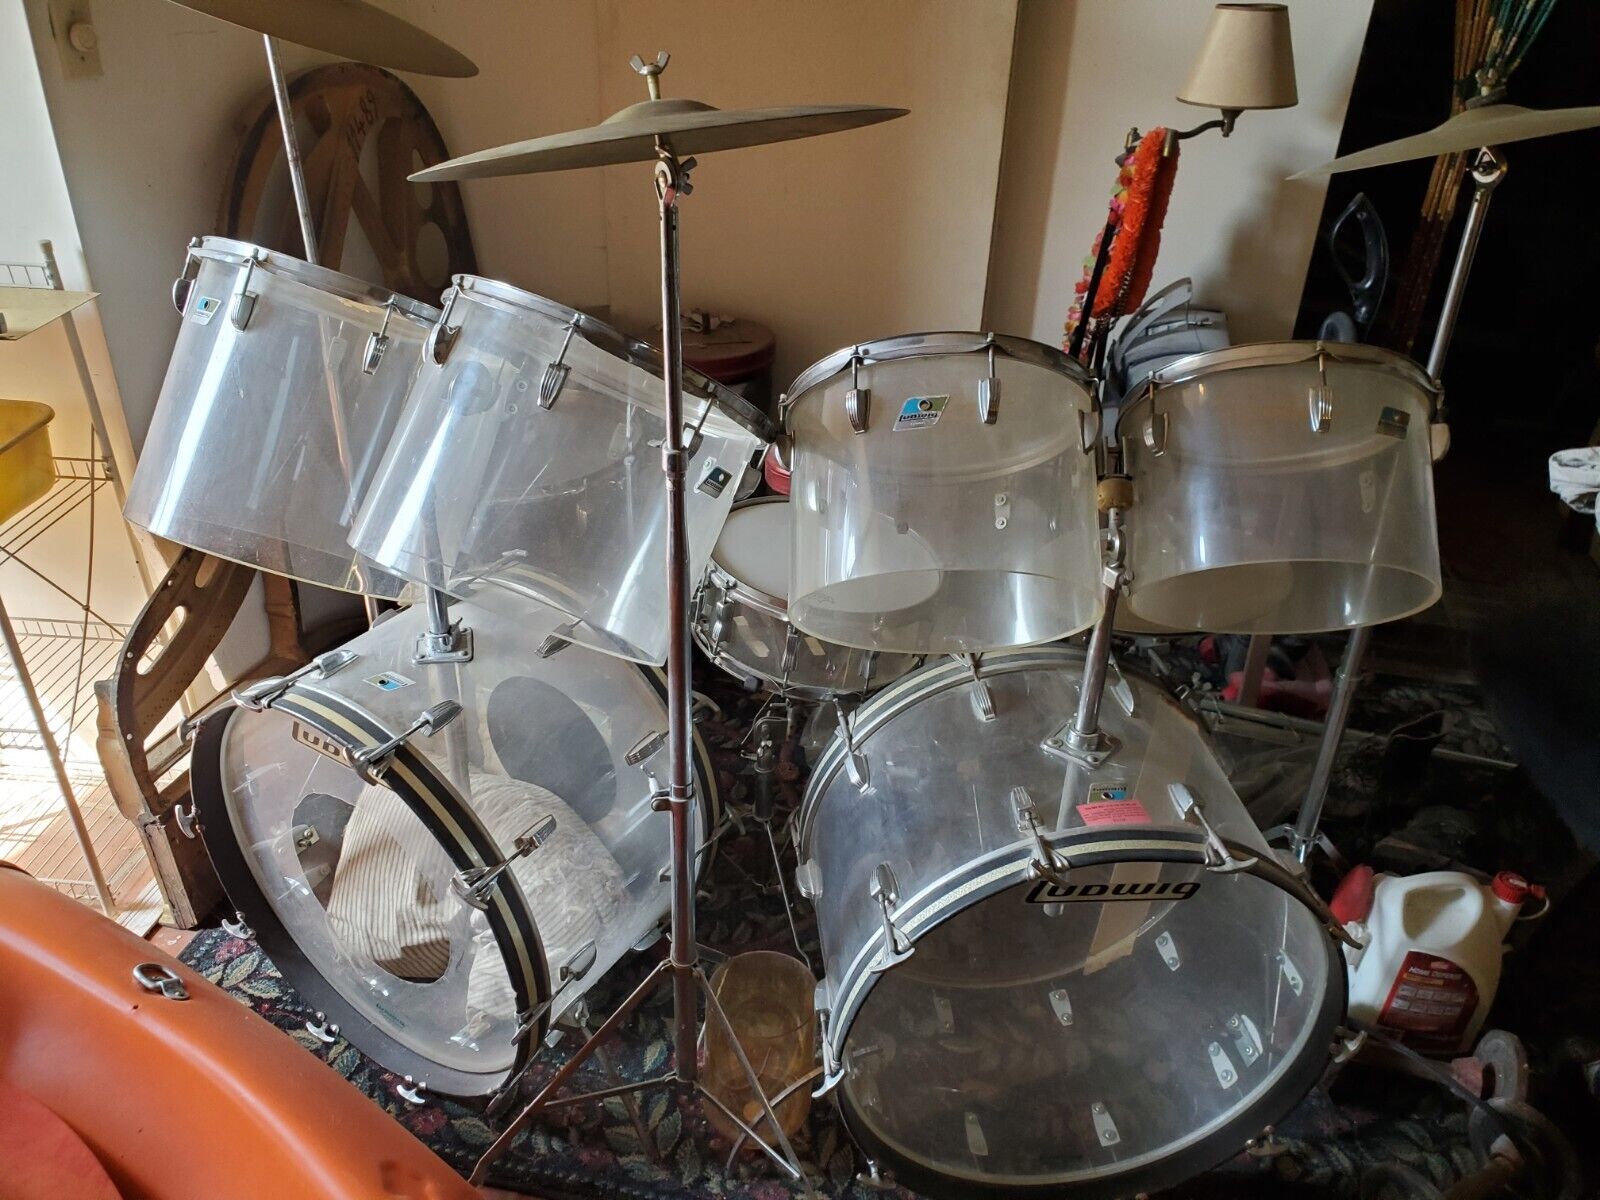  Ludwig Drum Kit Clear Acrylic